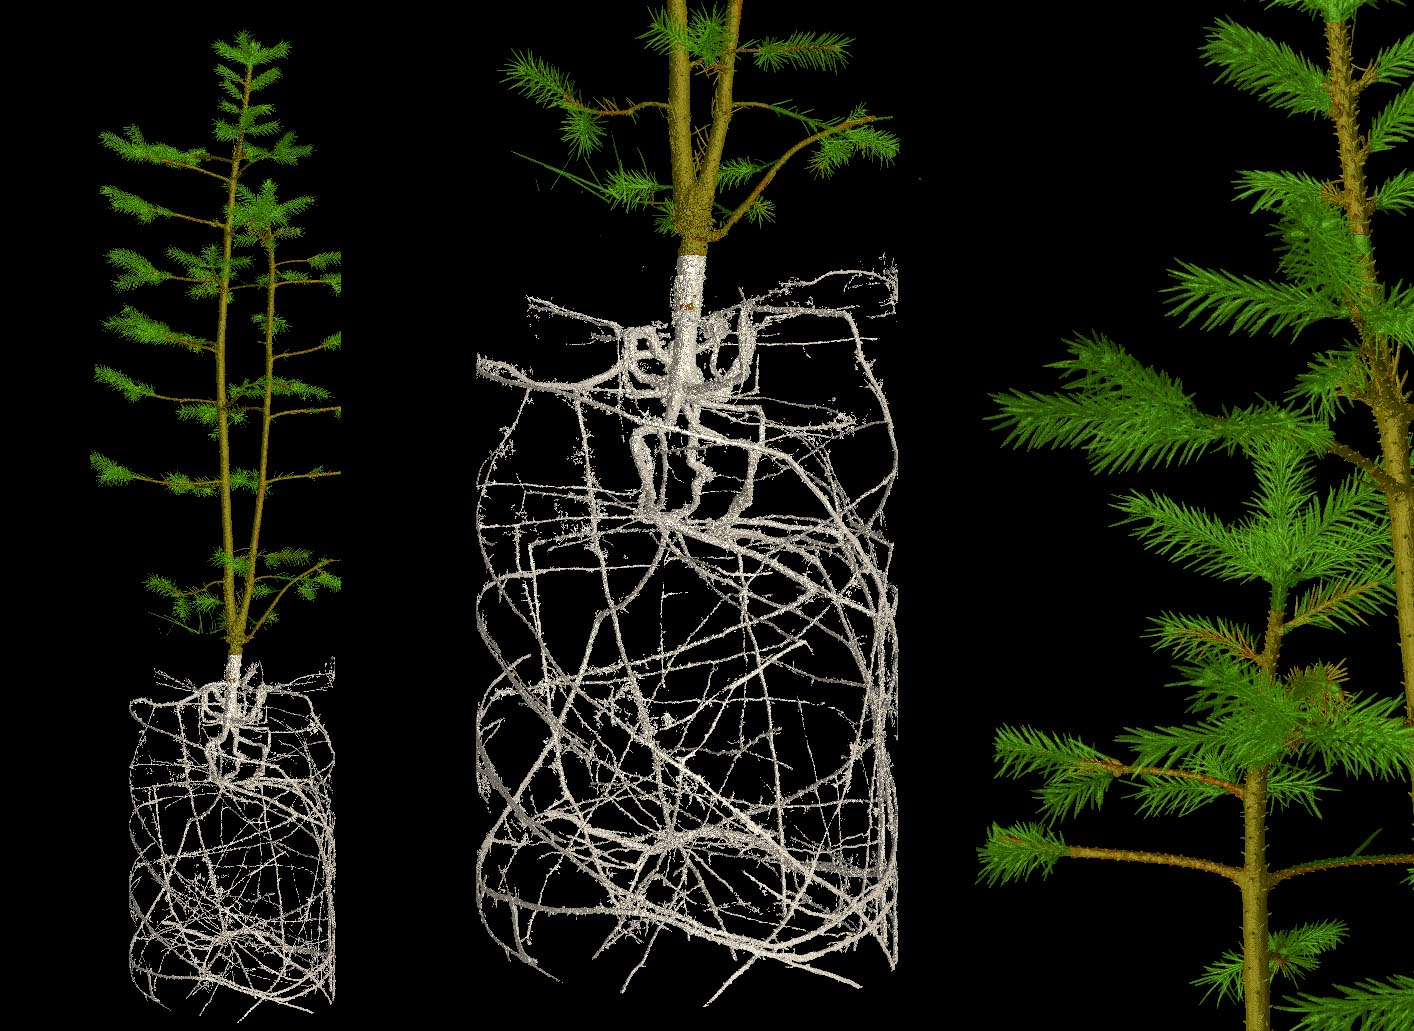 The Norway spruce, traditionally used as a Christmas tree, has evolved to survive the sub-zero temperatures of the Arctic winter. Their thin needles reduce water loss and their roots use as much space as they can. The roots of this two-year-old sapling have been limited by its pot. Image credit - Brian Atkinson